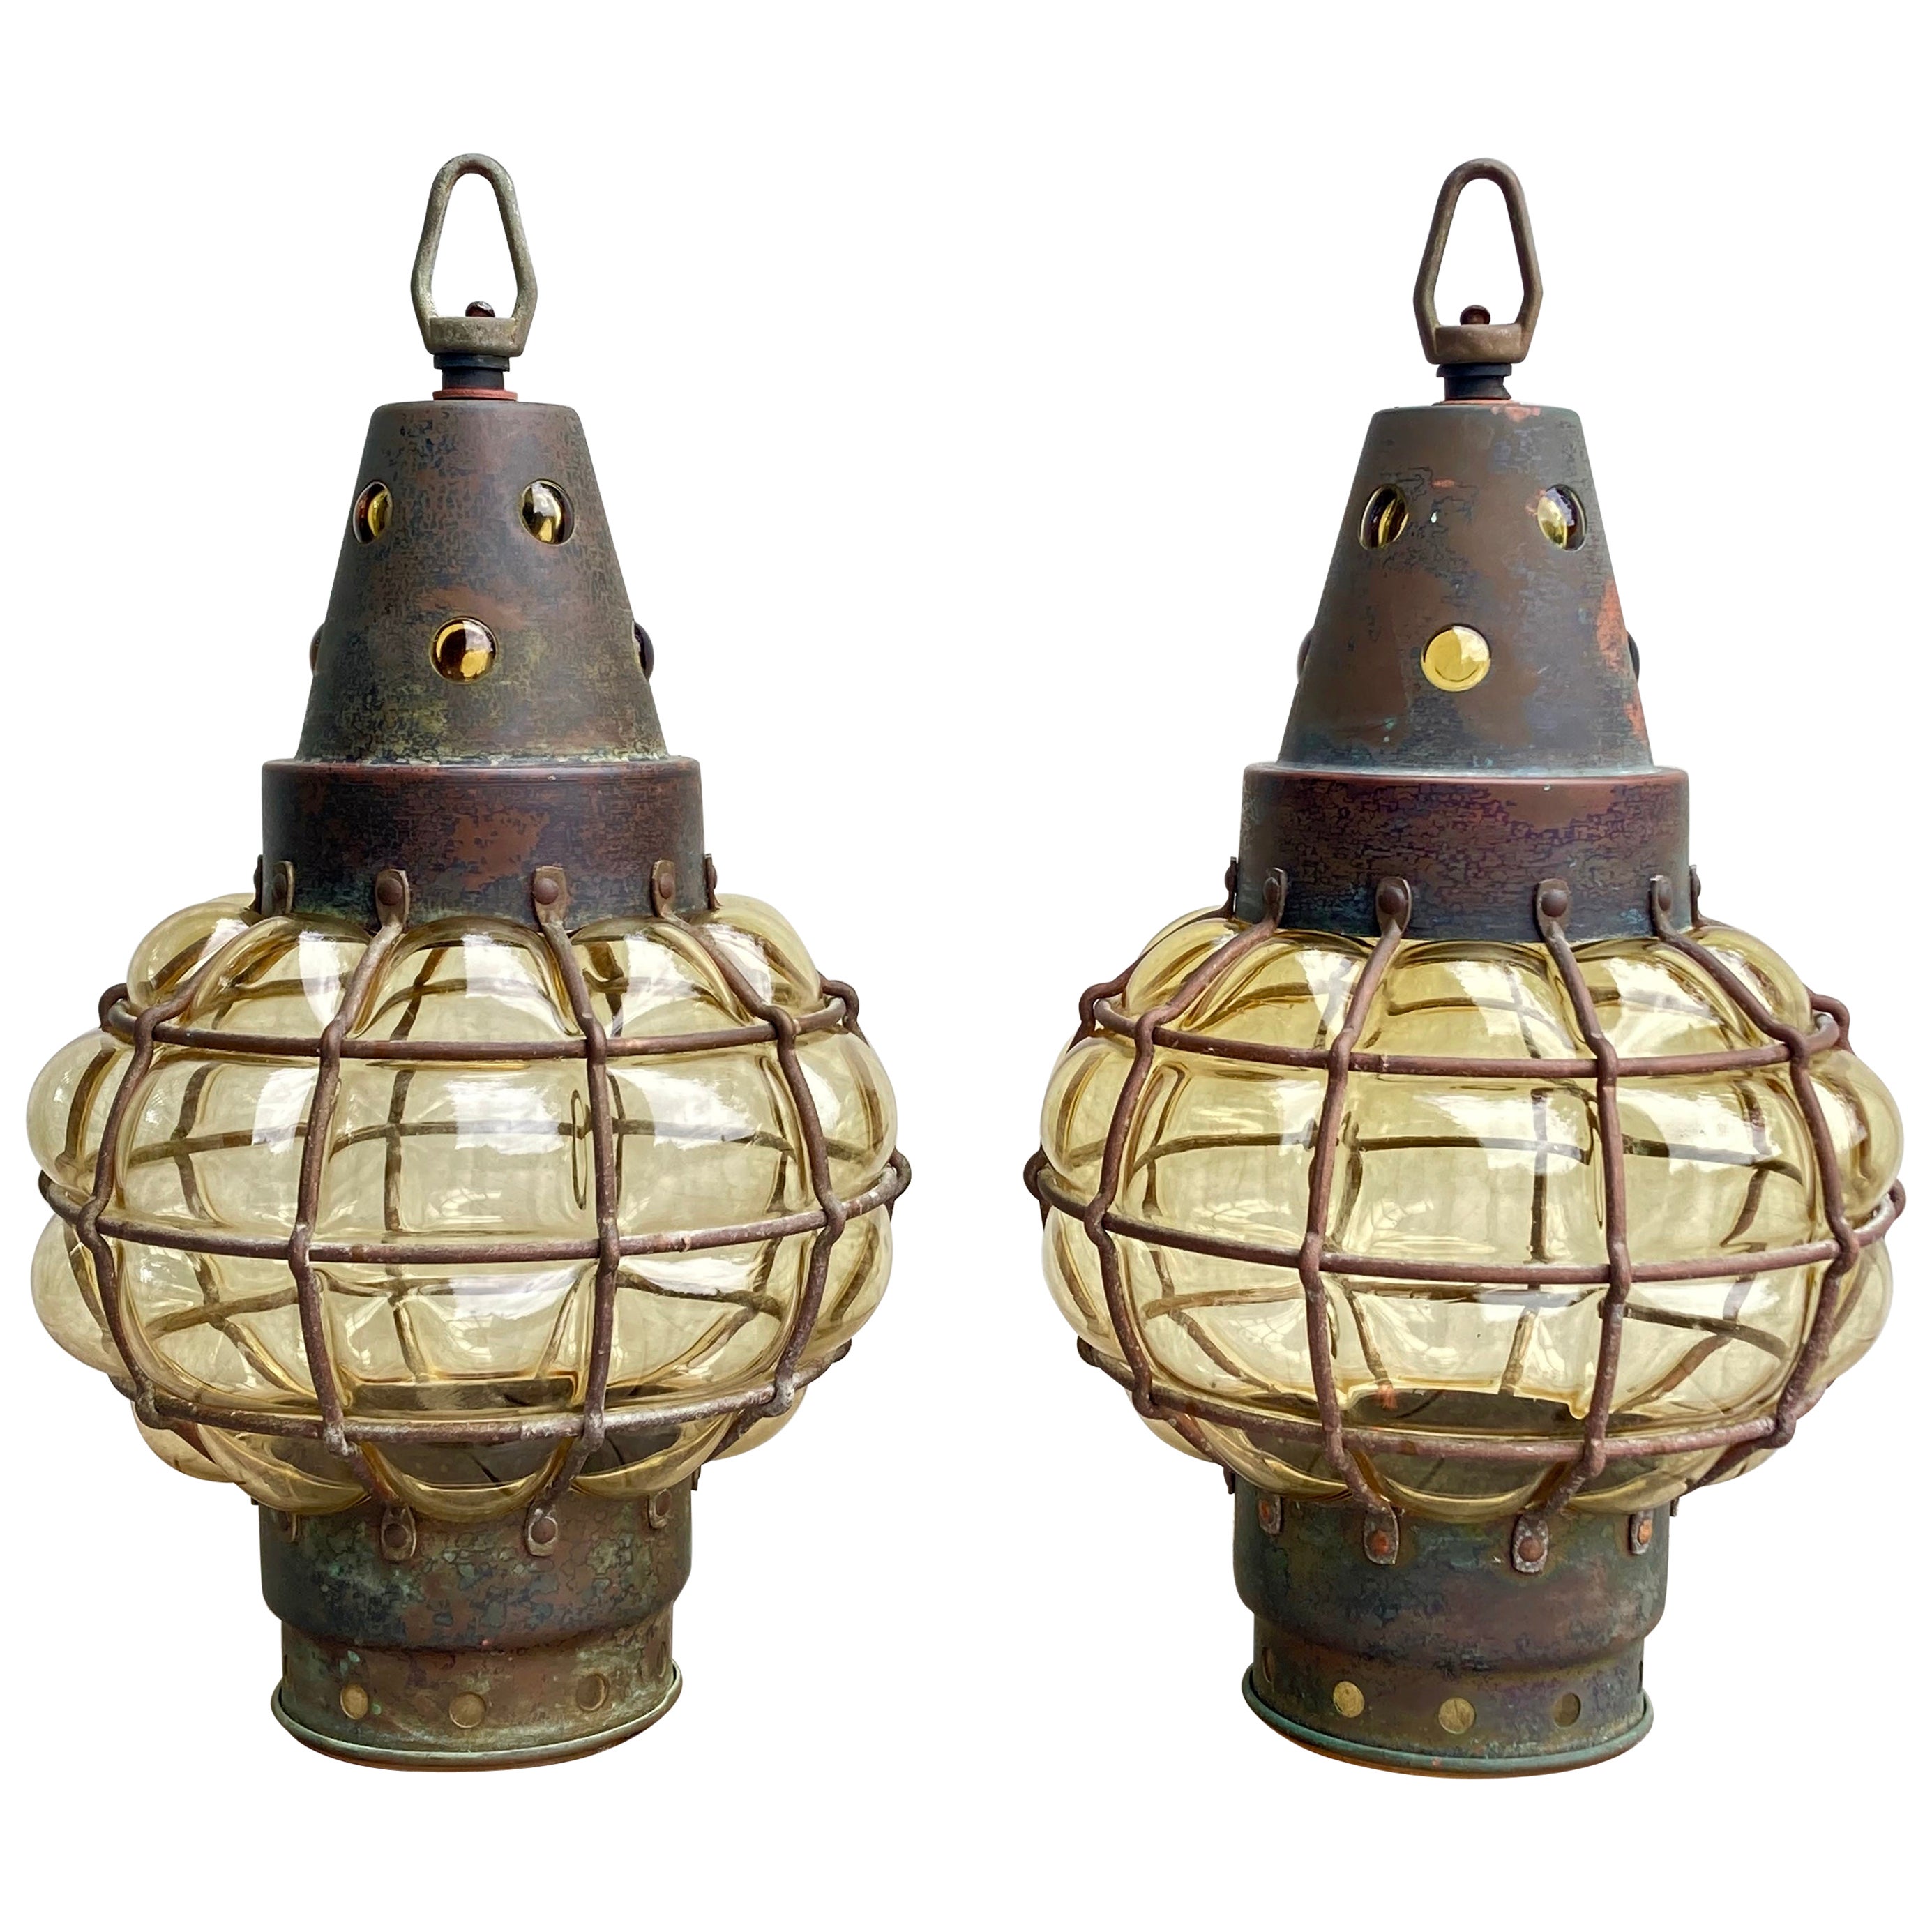 Pair of Antique 1920s Arts & Crafts Hanging Lanterns in Metal and Handmade Glass For Sale